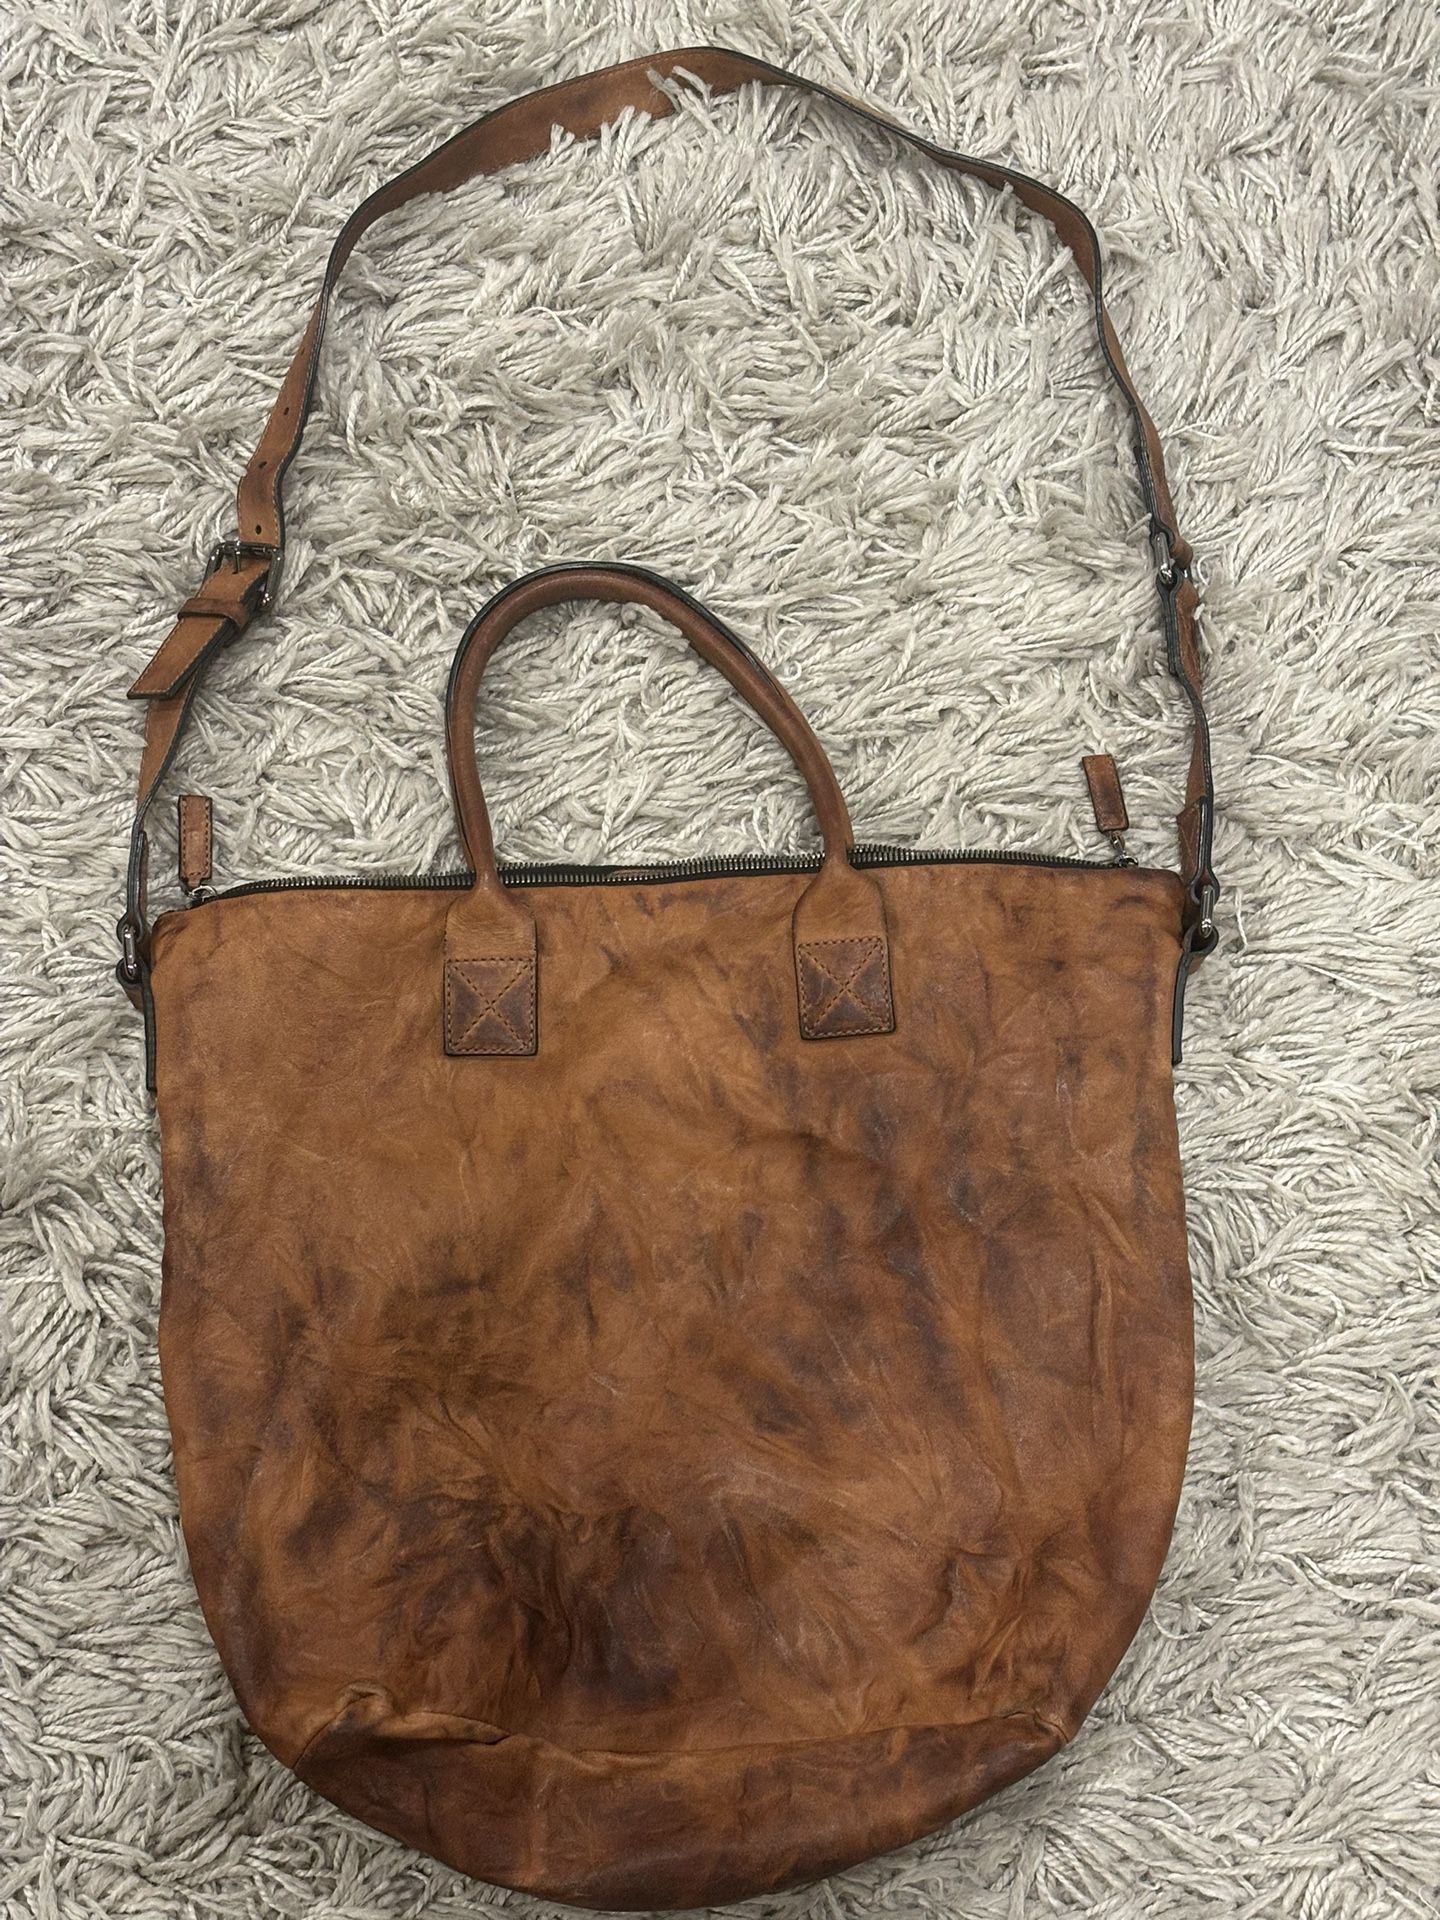 Musette Genuine leather